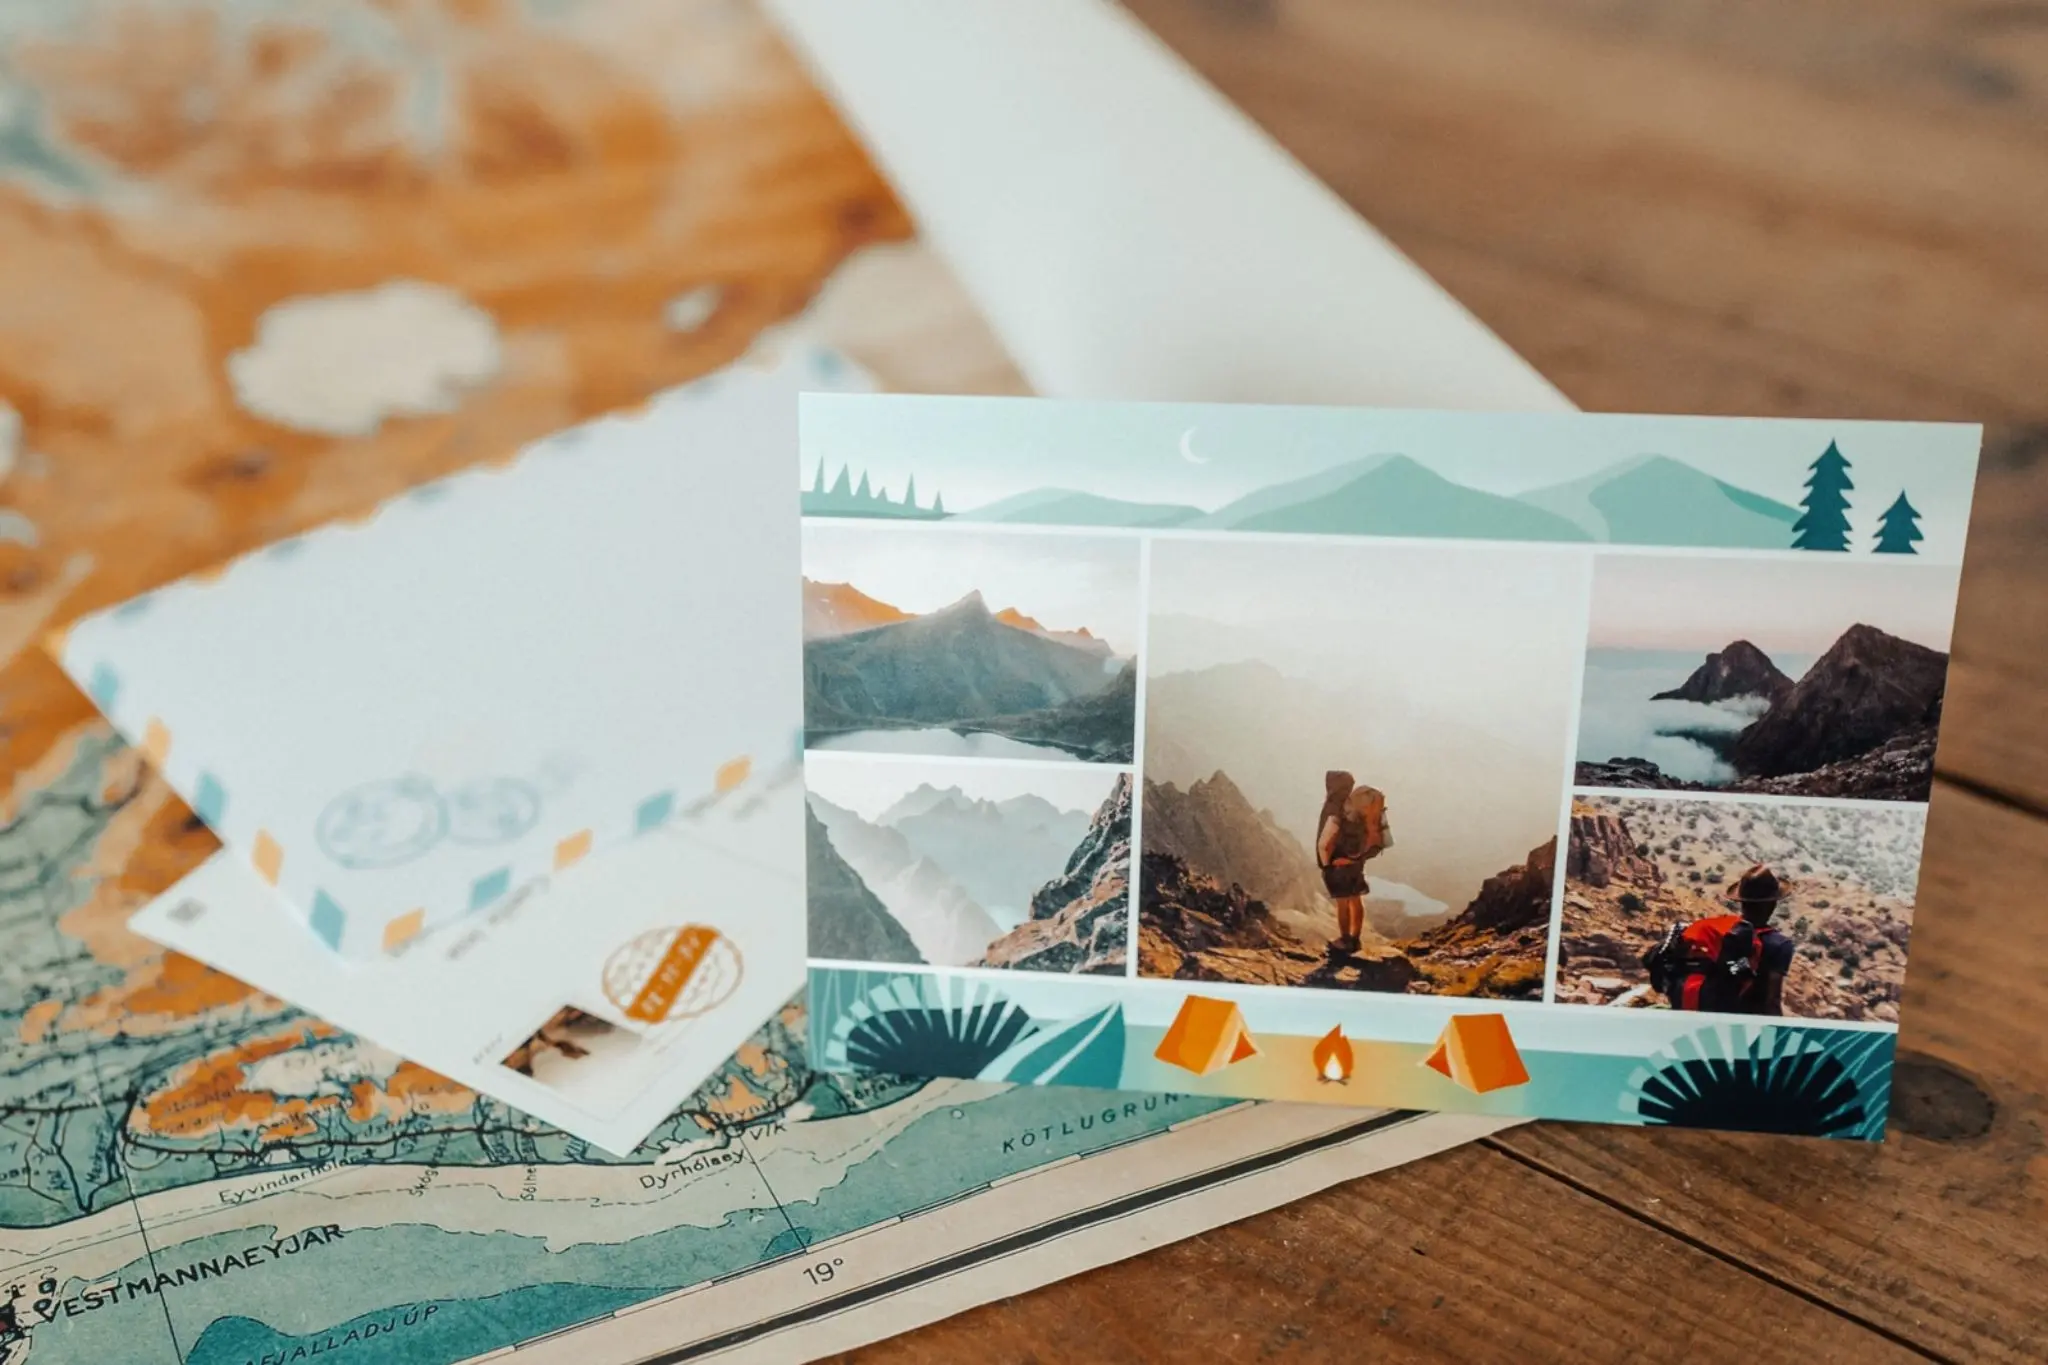 Postcard with photos of landscapes